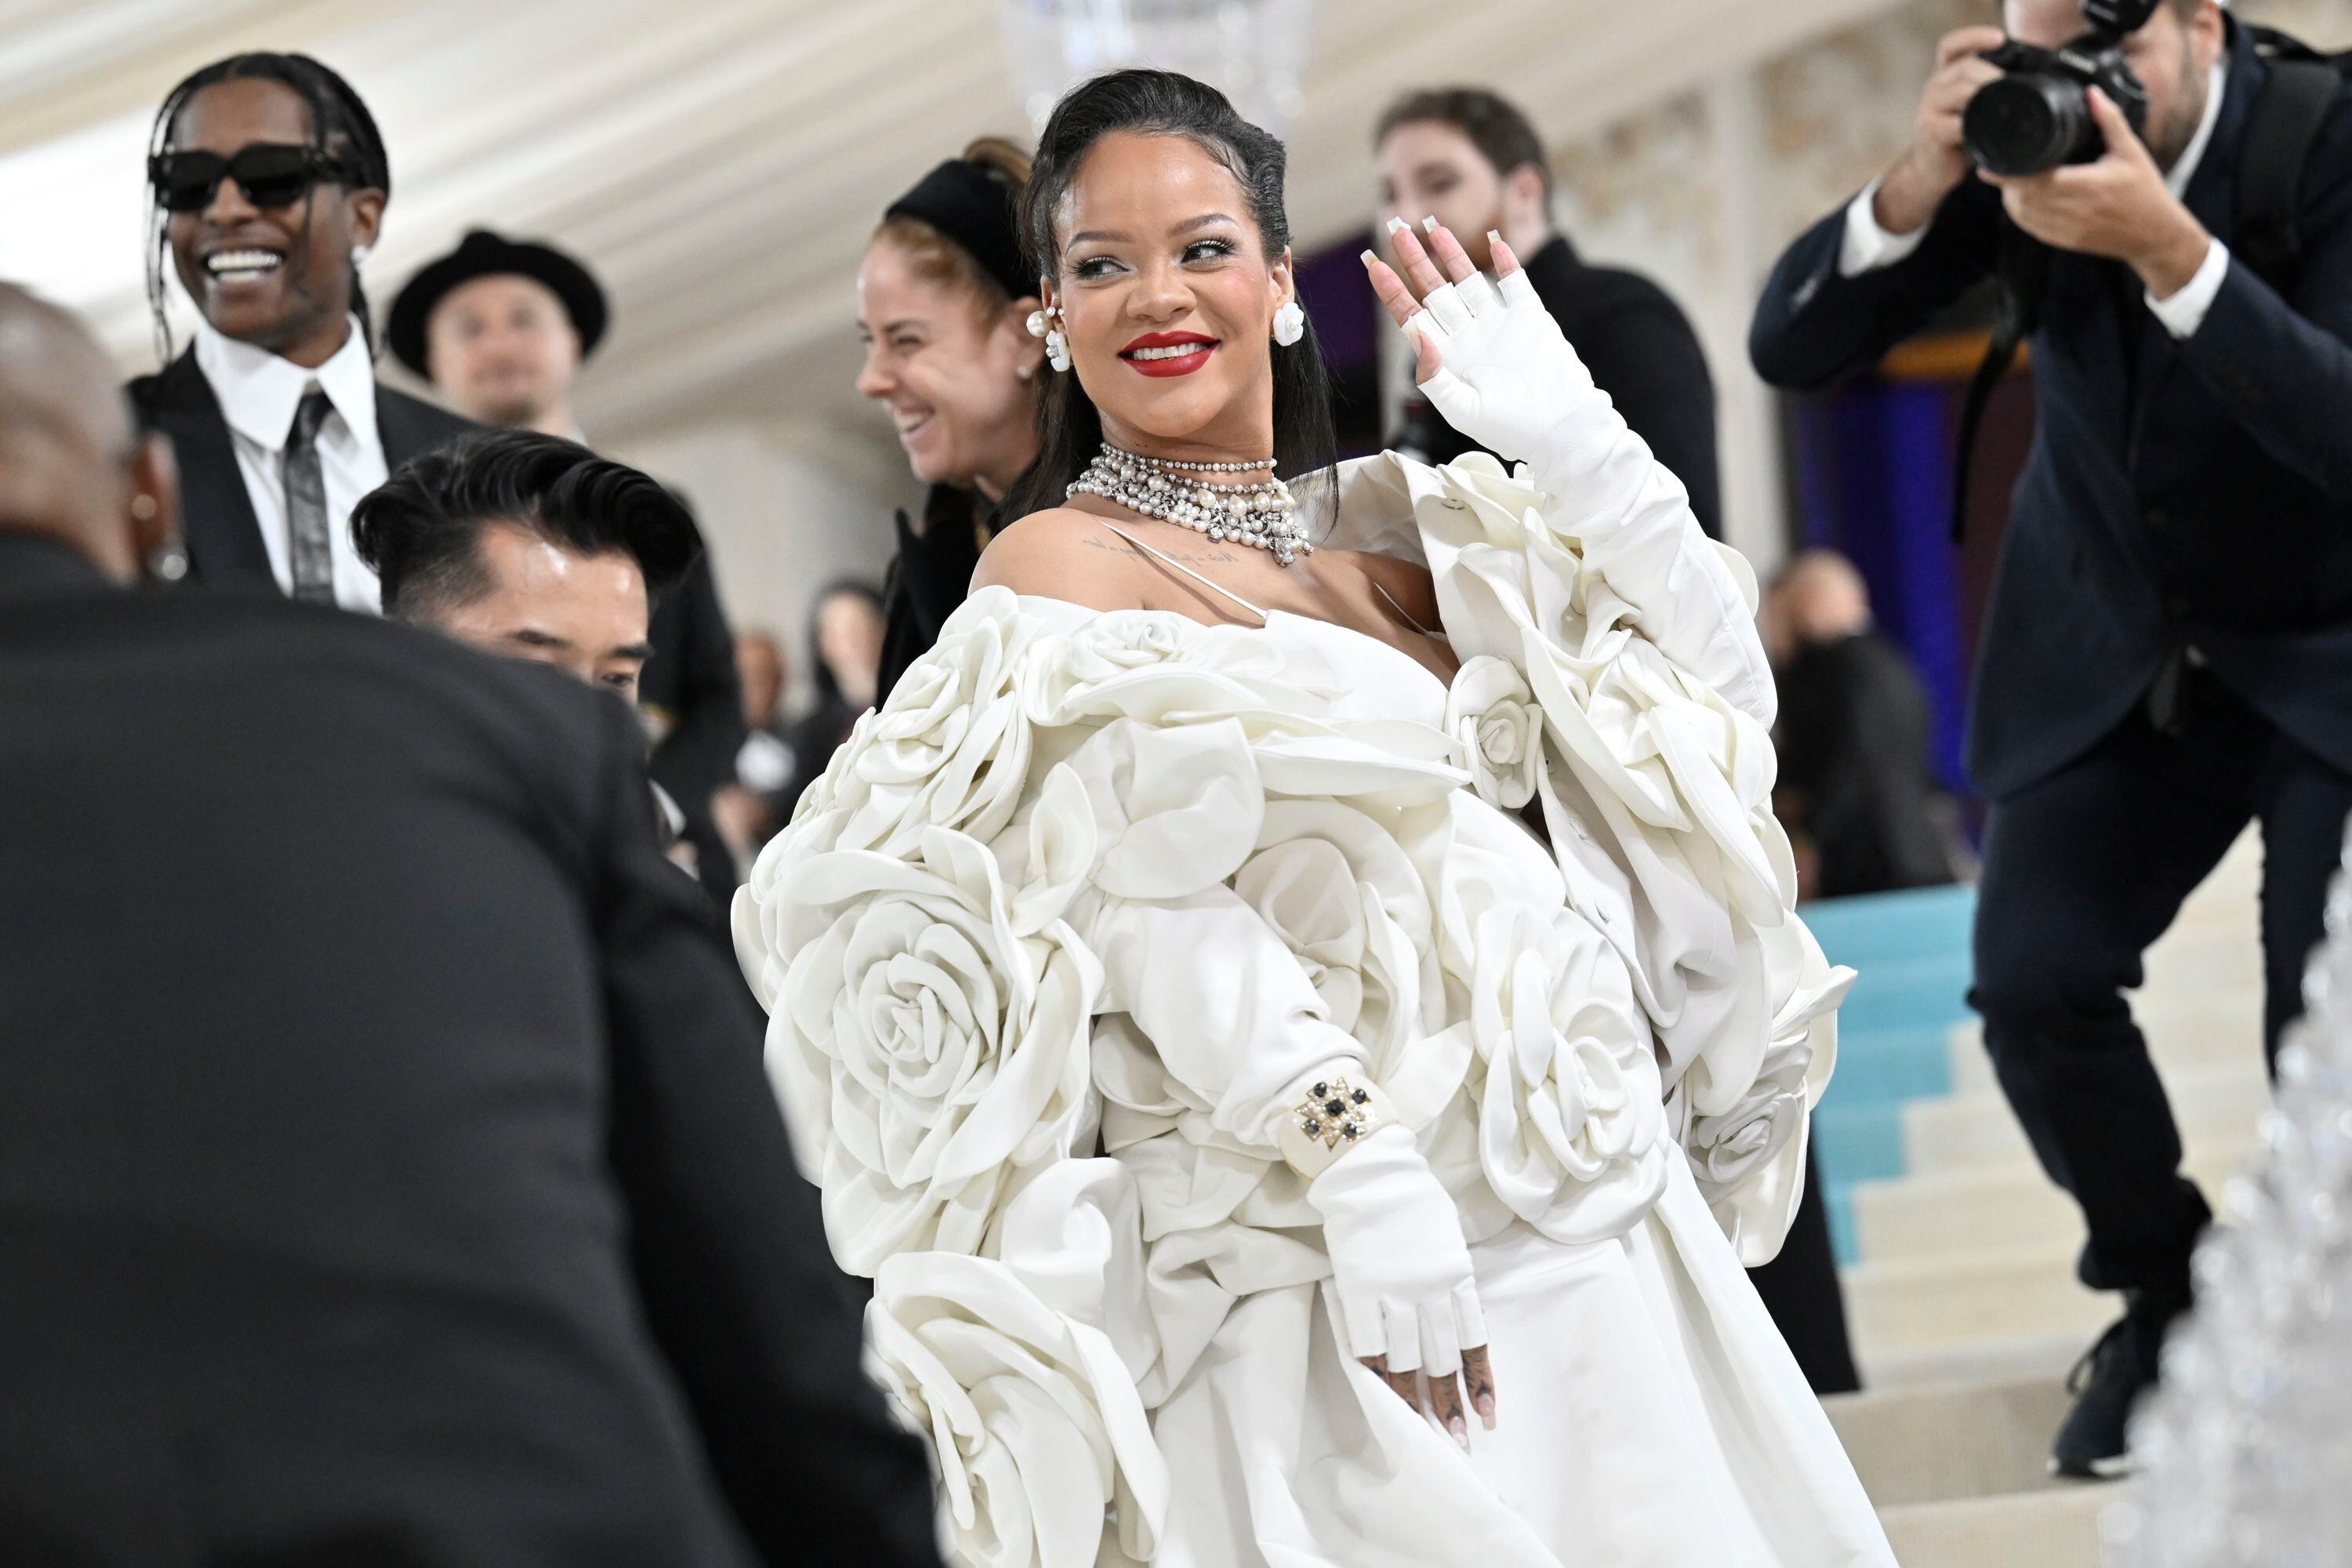 Another Met Gala in the books, so how did they do on theme?